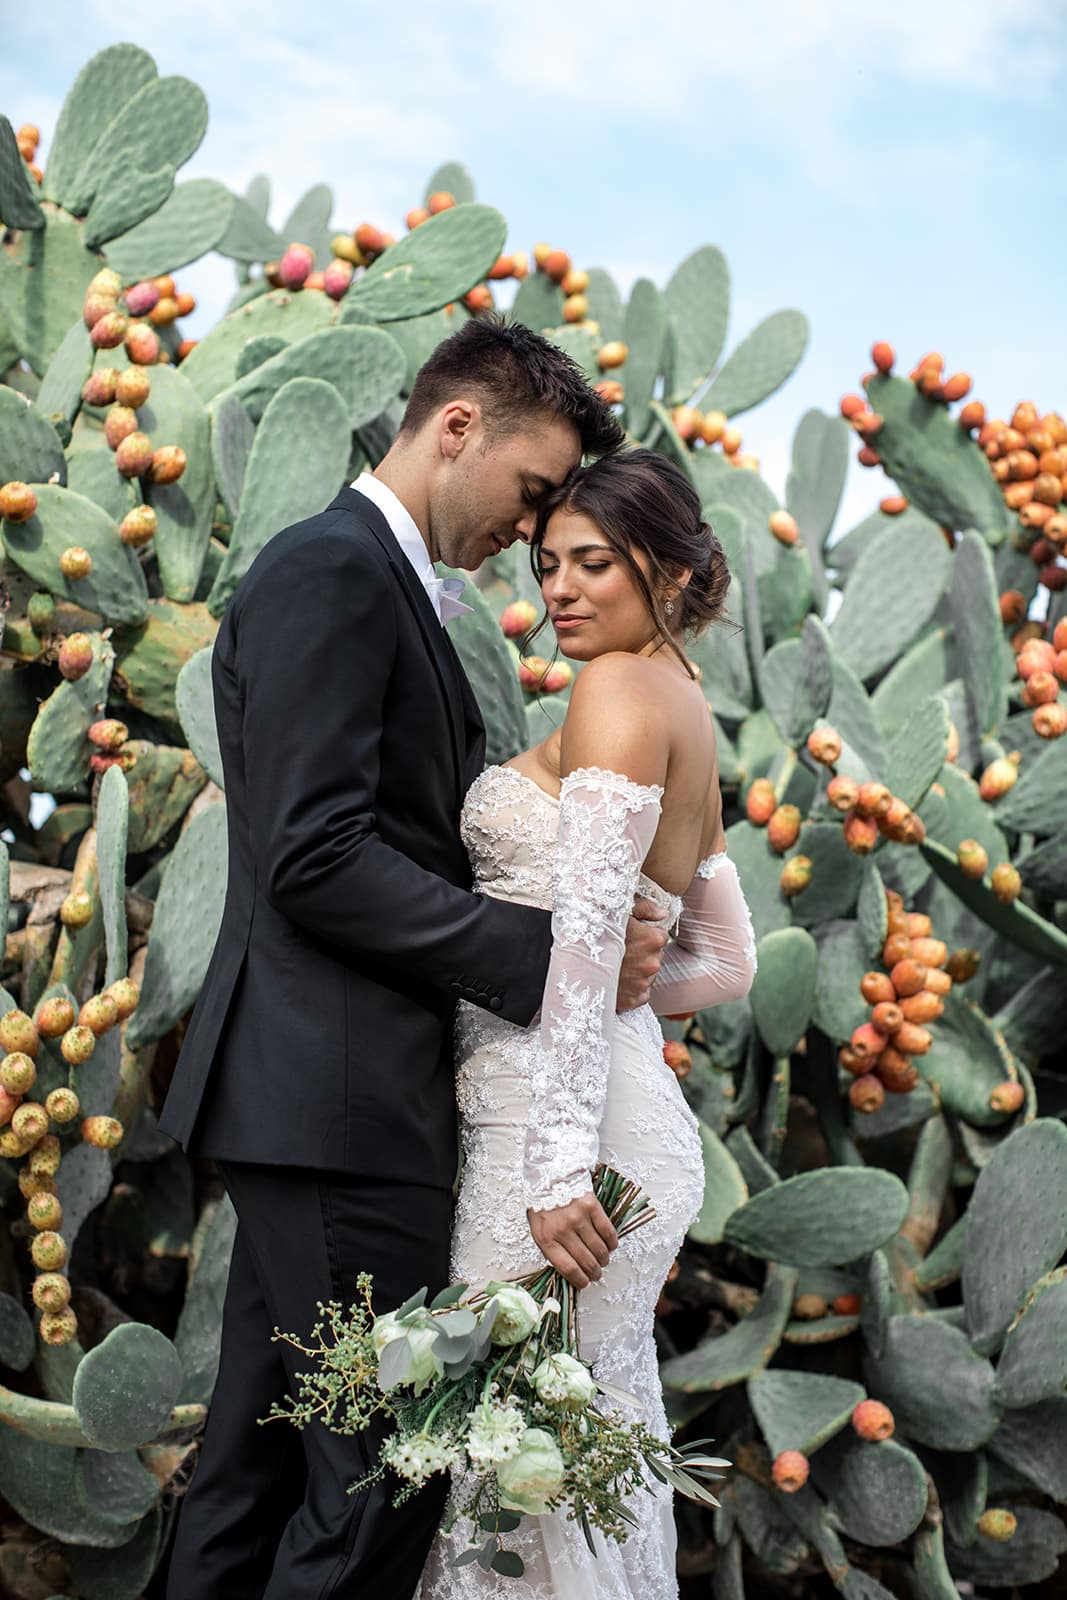 Bride and groom stand together for couple's portraits amidst cactus in Puglia Italy